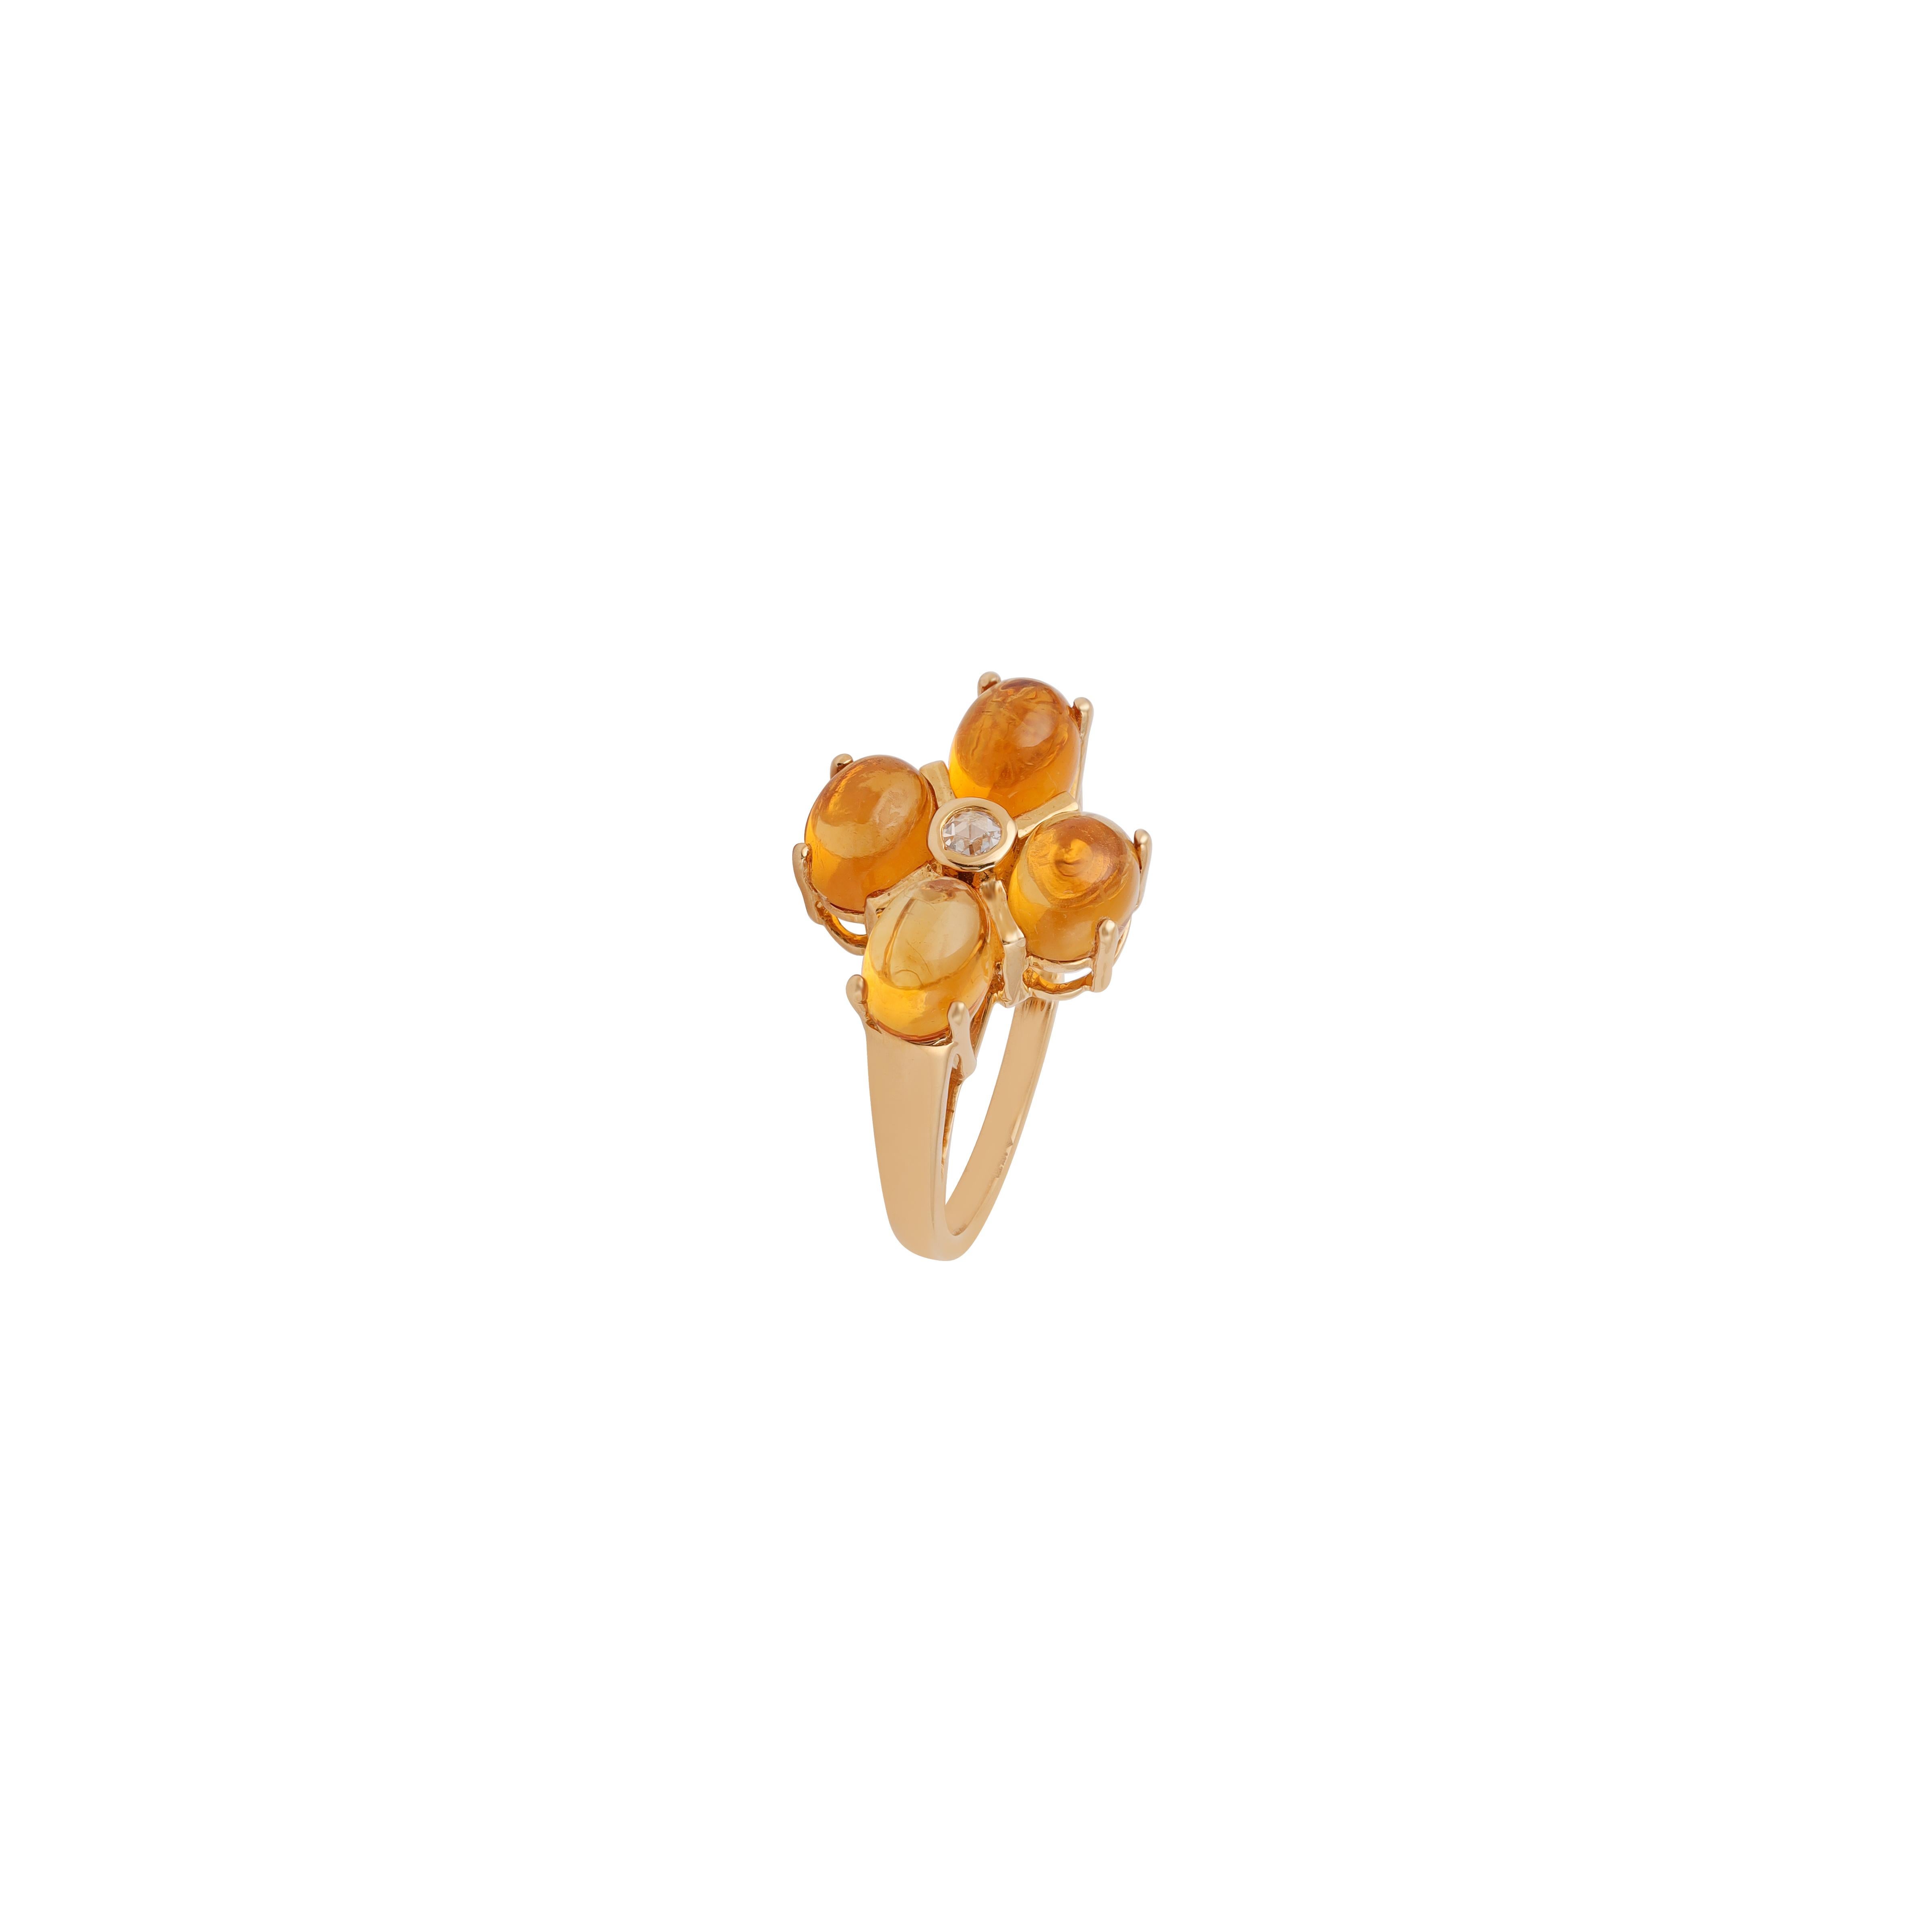 4.01 Carat Clear Citrine & Diamond Ring in 18k Gold For Sale 2